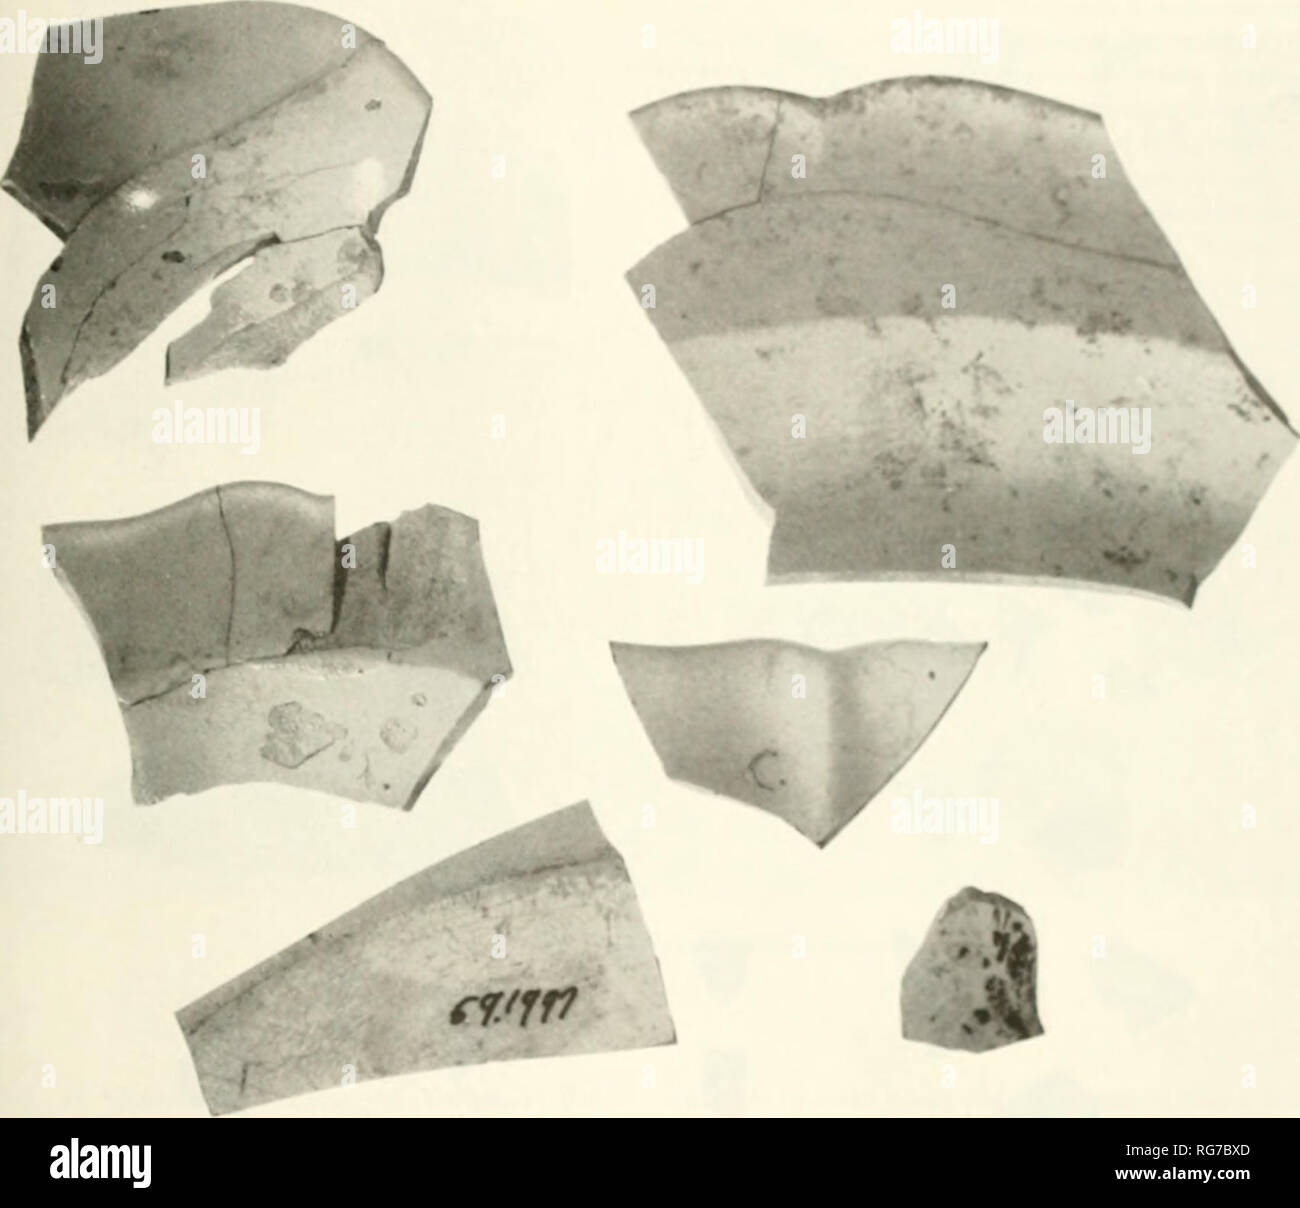 . Bulletin - United States National Museum. Science. Figure 72.âQi'f:F.NSvARK, about IH(I0. come three meager sherds of marbled ware, probably from three difTerent vessels (ITSNM 59.1(.23. ')9.1748, 59.1851). They are brownish red with white veining under an amber lead glaze. A posset pot of these colors ill the 'ictoria and Albert Museum is supposed, by Rackham, to date from about 1 740.'&quot; Bi.ACK-GL.ZED FINE REDWARE.âWhieldoti made a black-blazed, fine rcdware, as did Maurice Thurslield at Jackfield in Shropshire.'** A fragnjcnt of a bl.ick- glazed teapot handle was found at MarllHiro Stock Photo